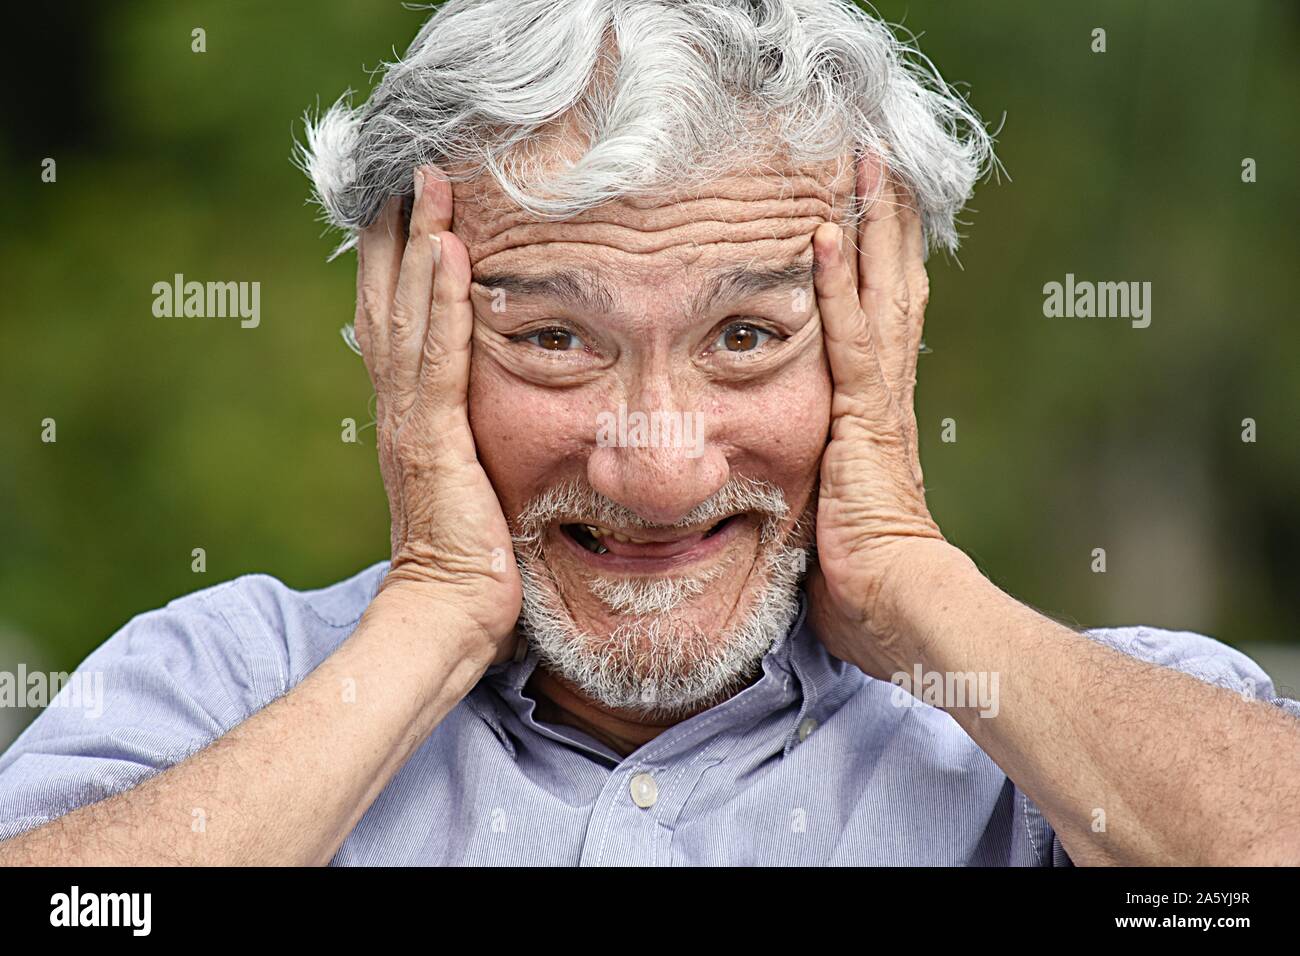 Goofy Old Person Stock Photo